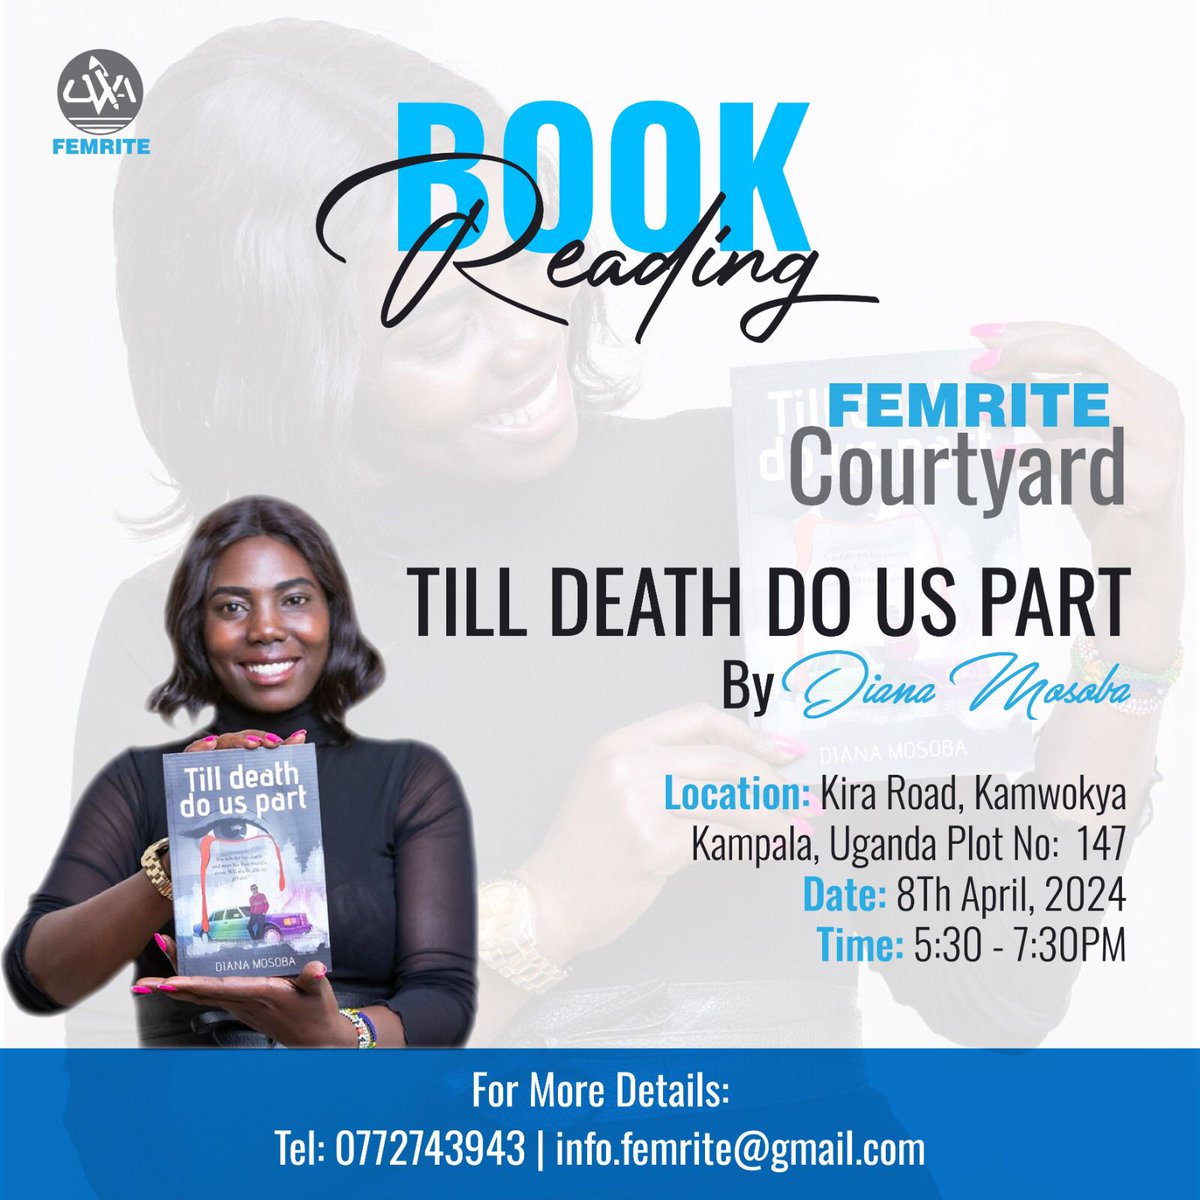 Join us on 8th April 2024 for a Book Reading 'Till Death Do us Part' with Diana Masoba, a Kenyan Writer. @FTusasirwe @twongye